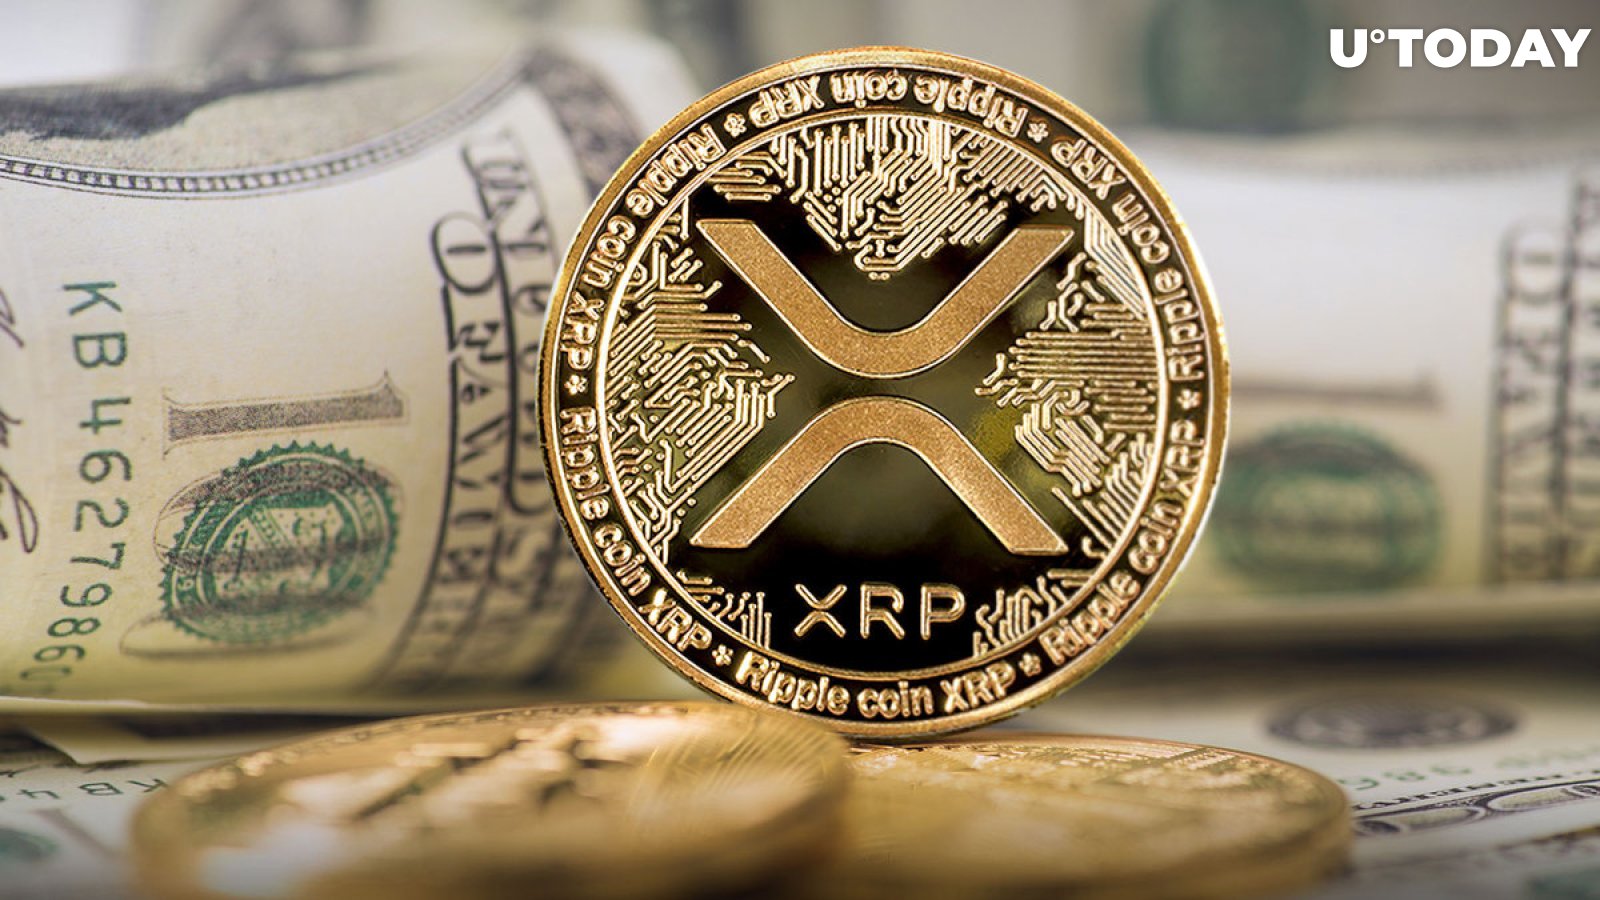 XRP Alert: 19 Million Tokens Move as Market Holds Breath